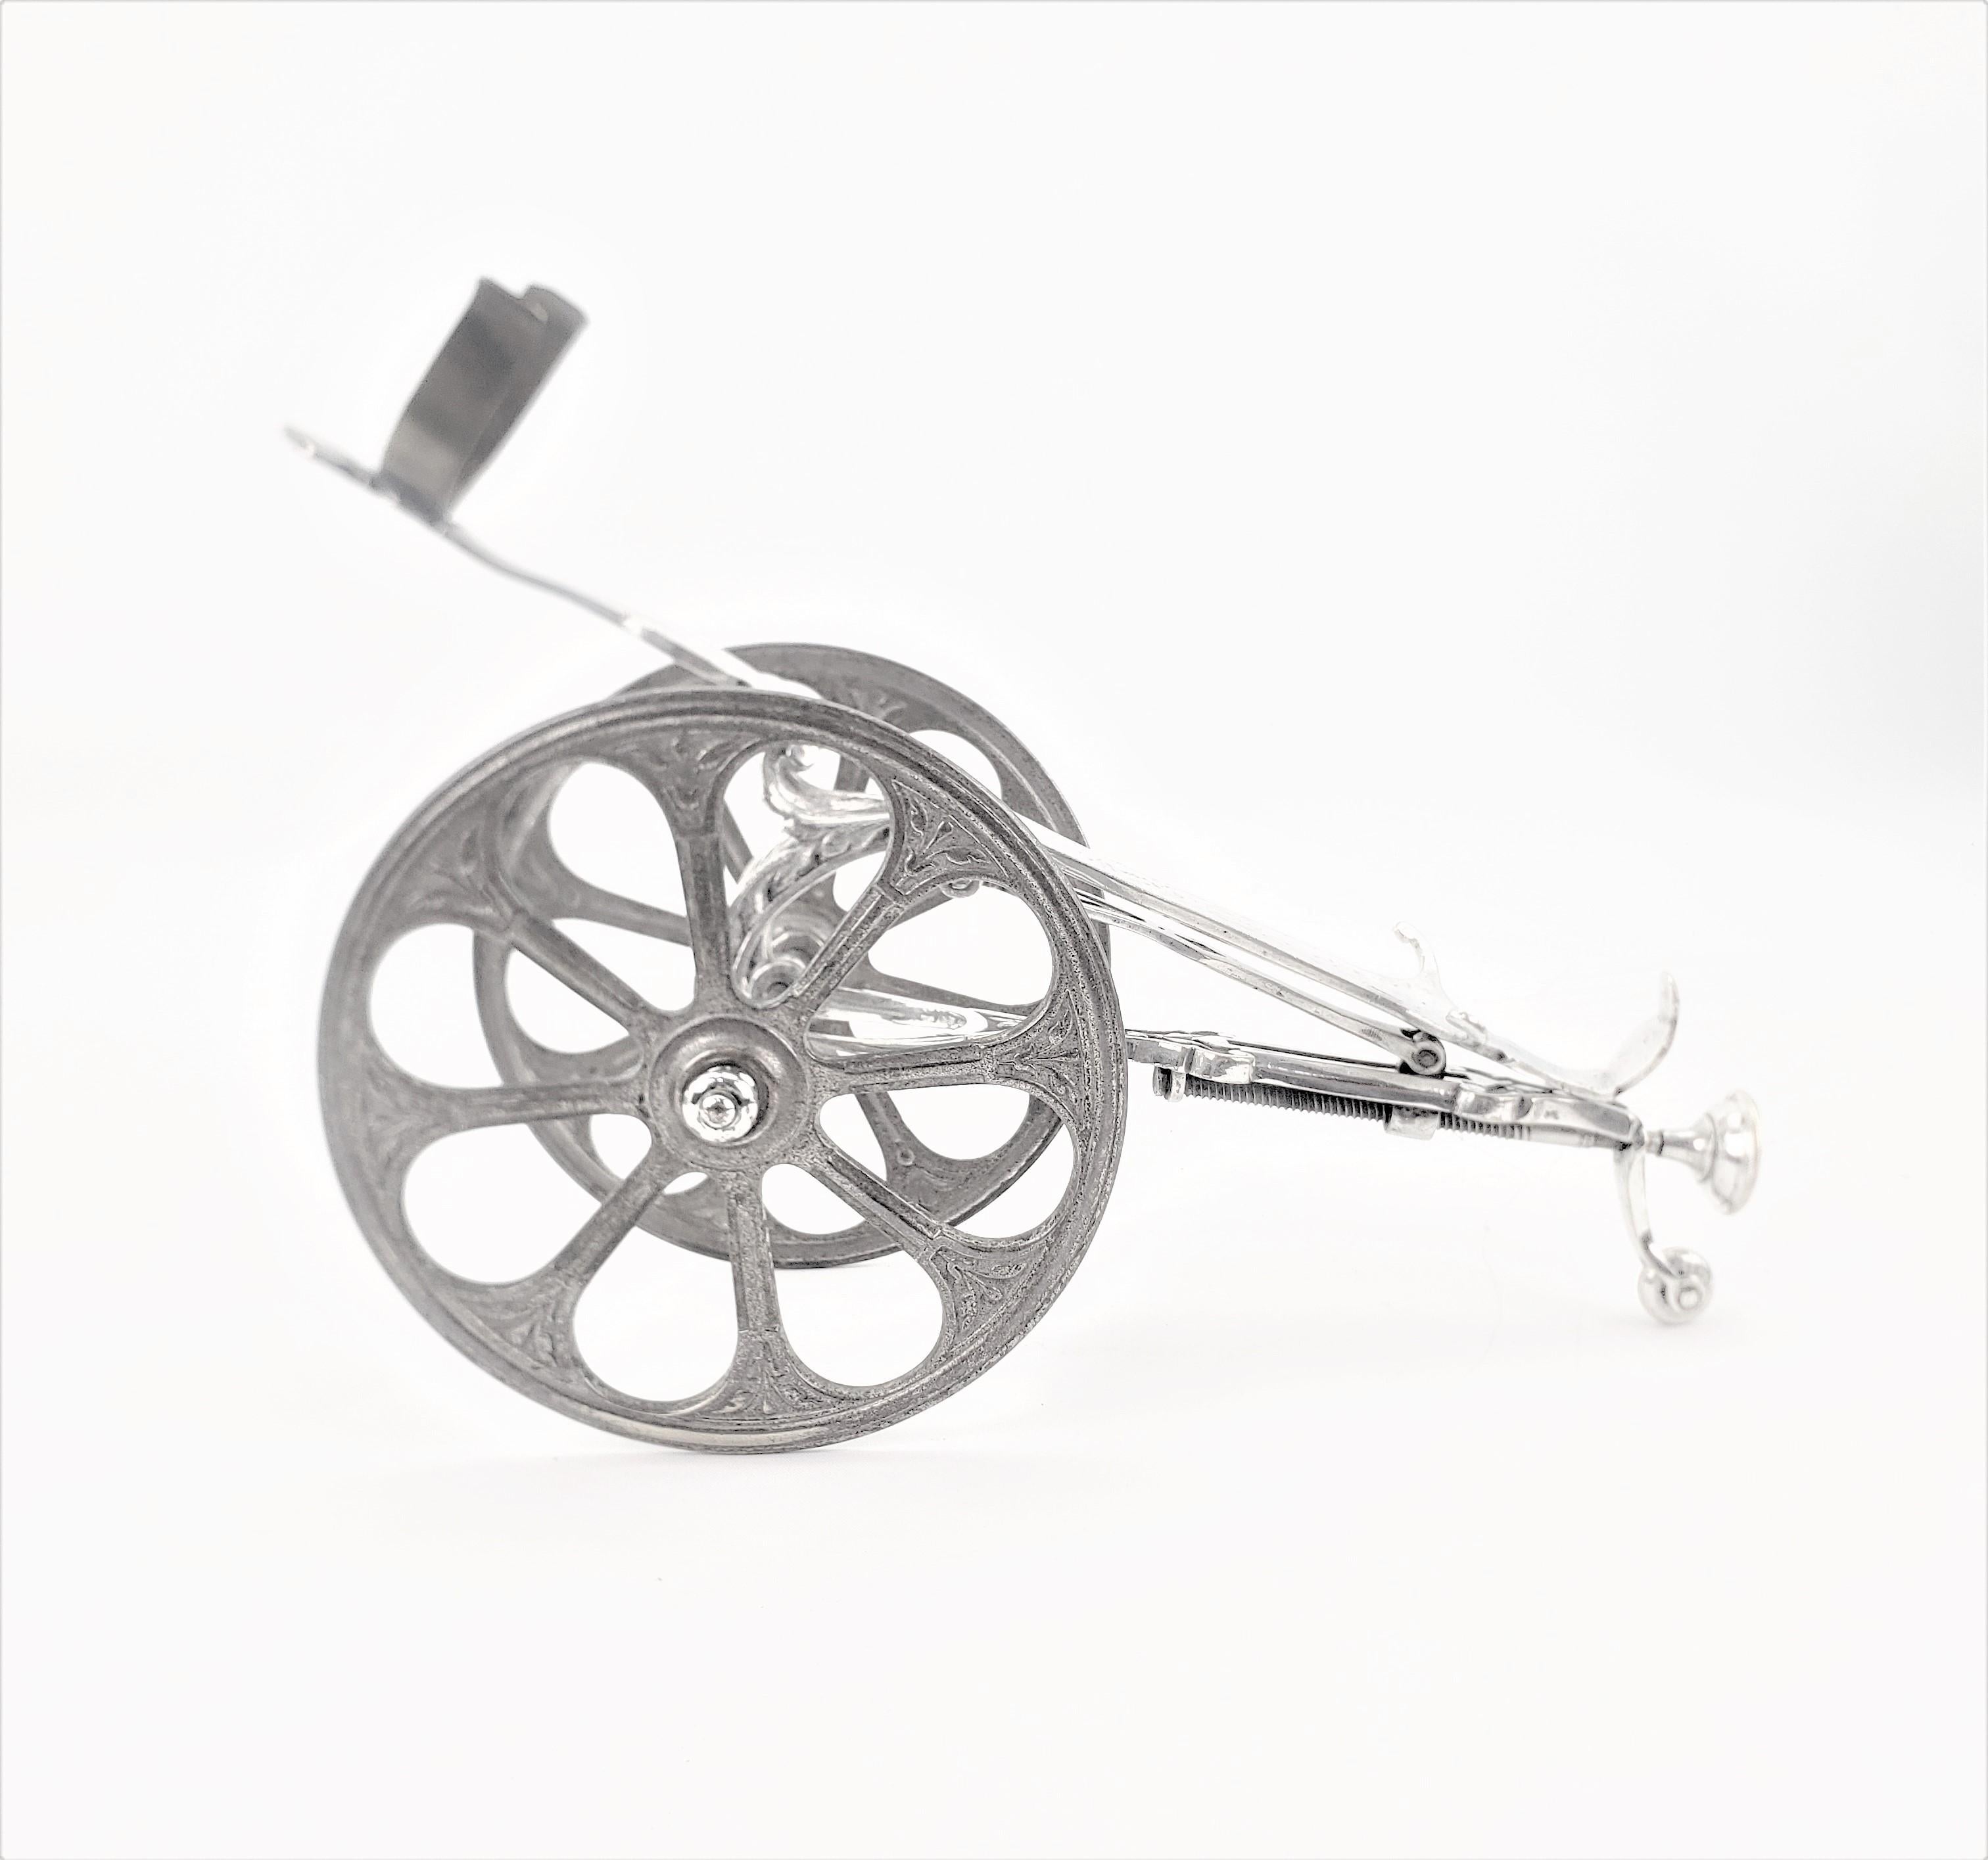 English Antique Silver Plated Mechanical Gun or Cannon Bottle Trolley Decanting Machine For Sale